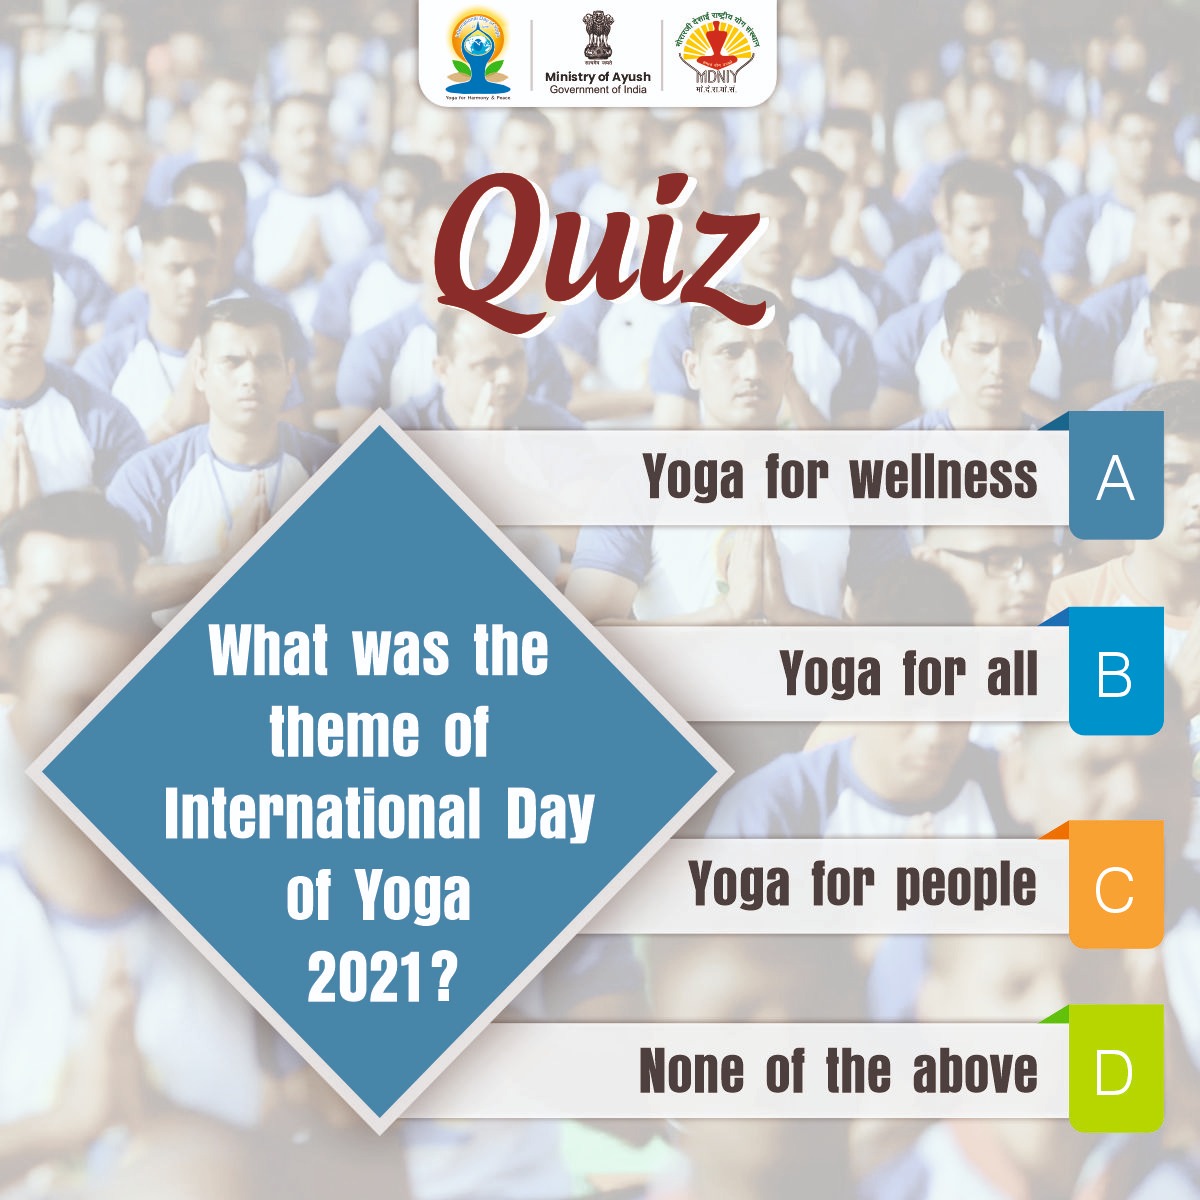 #QuizHour Put on your thinking caps! Comment your answers below. #Riddle #Guess #Yoga #Quiz #YogaPractice